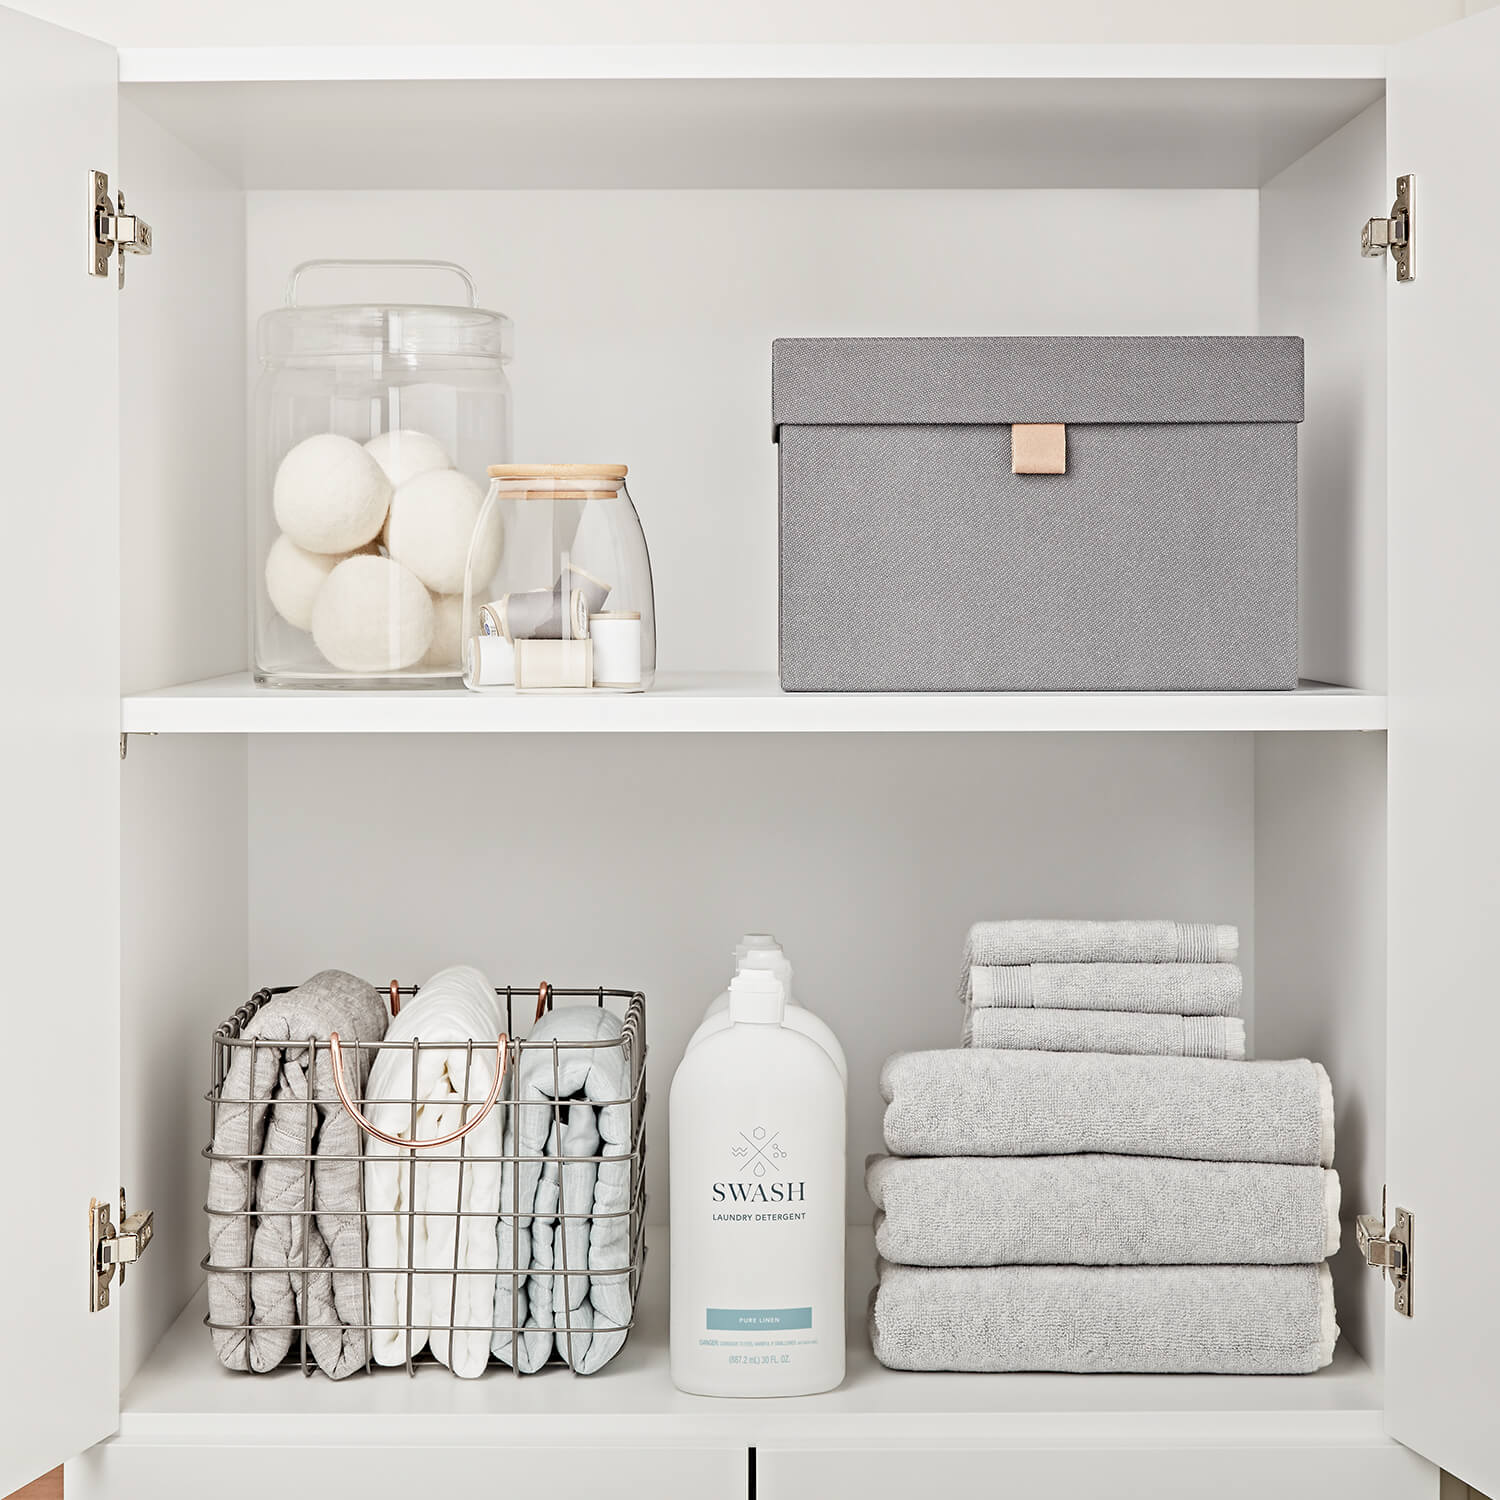 A neatly organized cabinet inside of a laundry room with fresh linens and Swash laundry detergent.